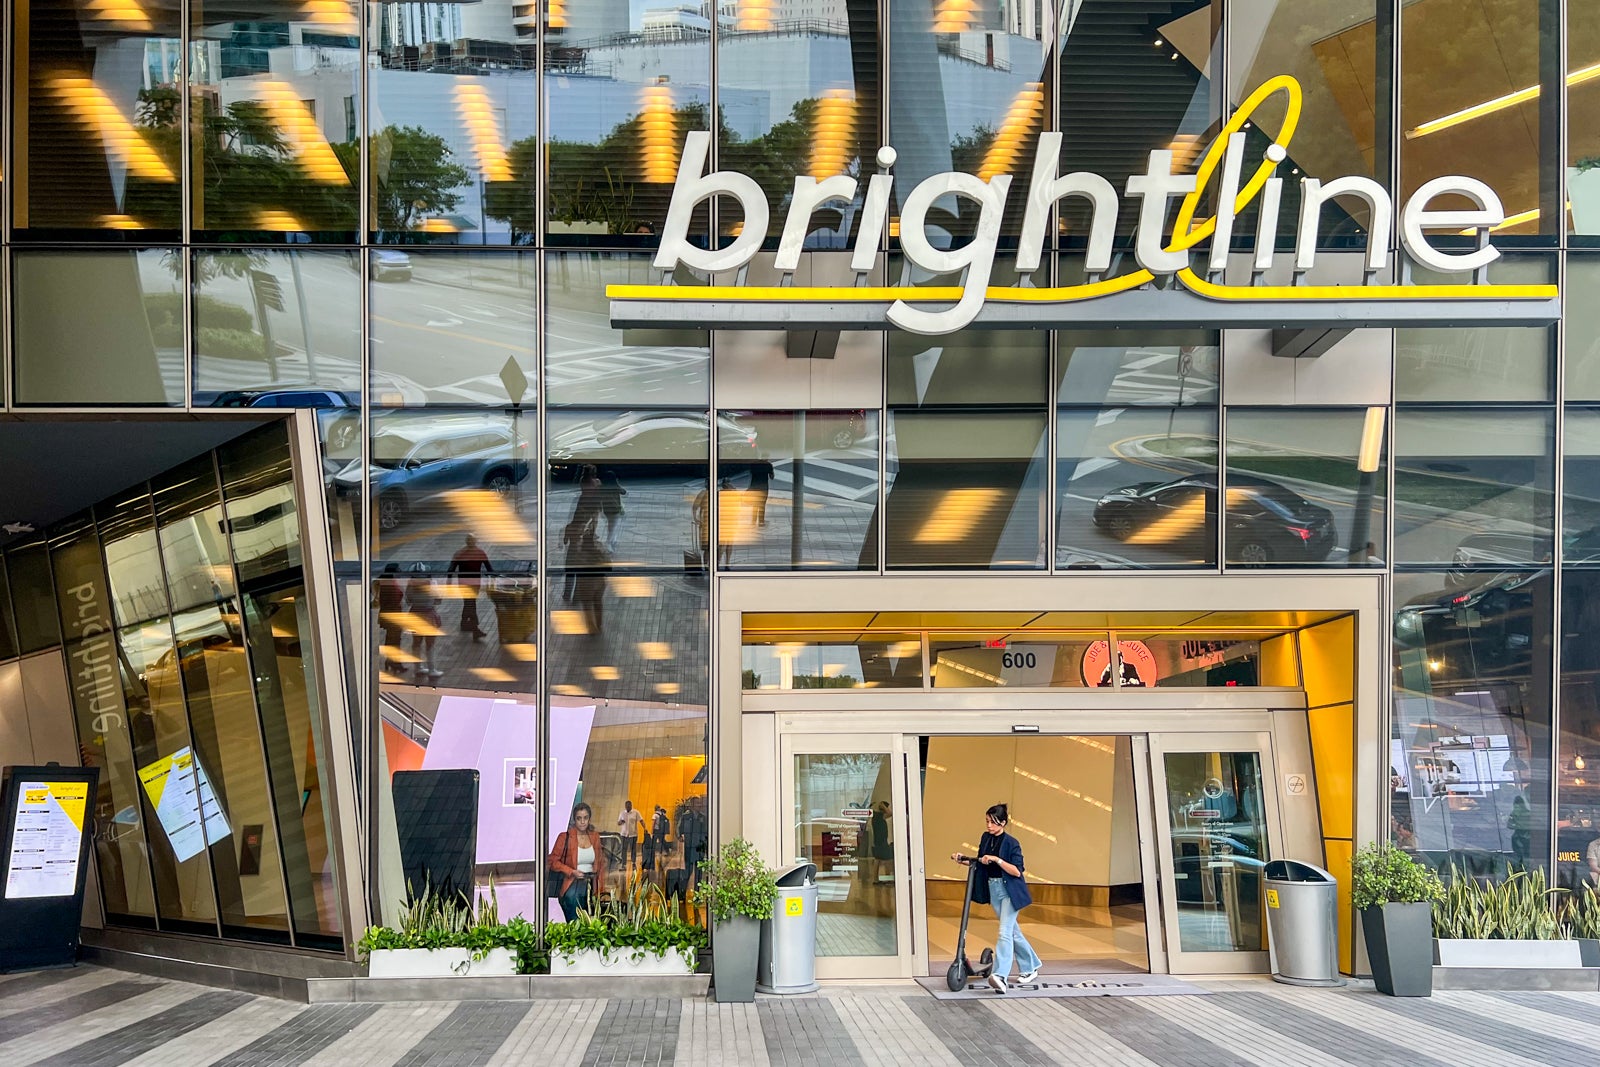 You are currently viewing Traveling to Florida soon? Save up to 50% on Brightline train tickets